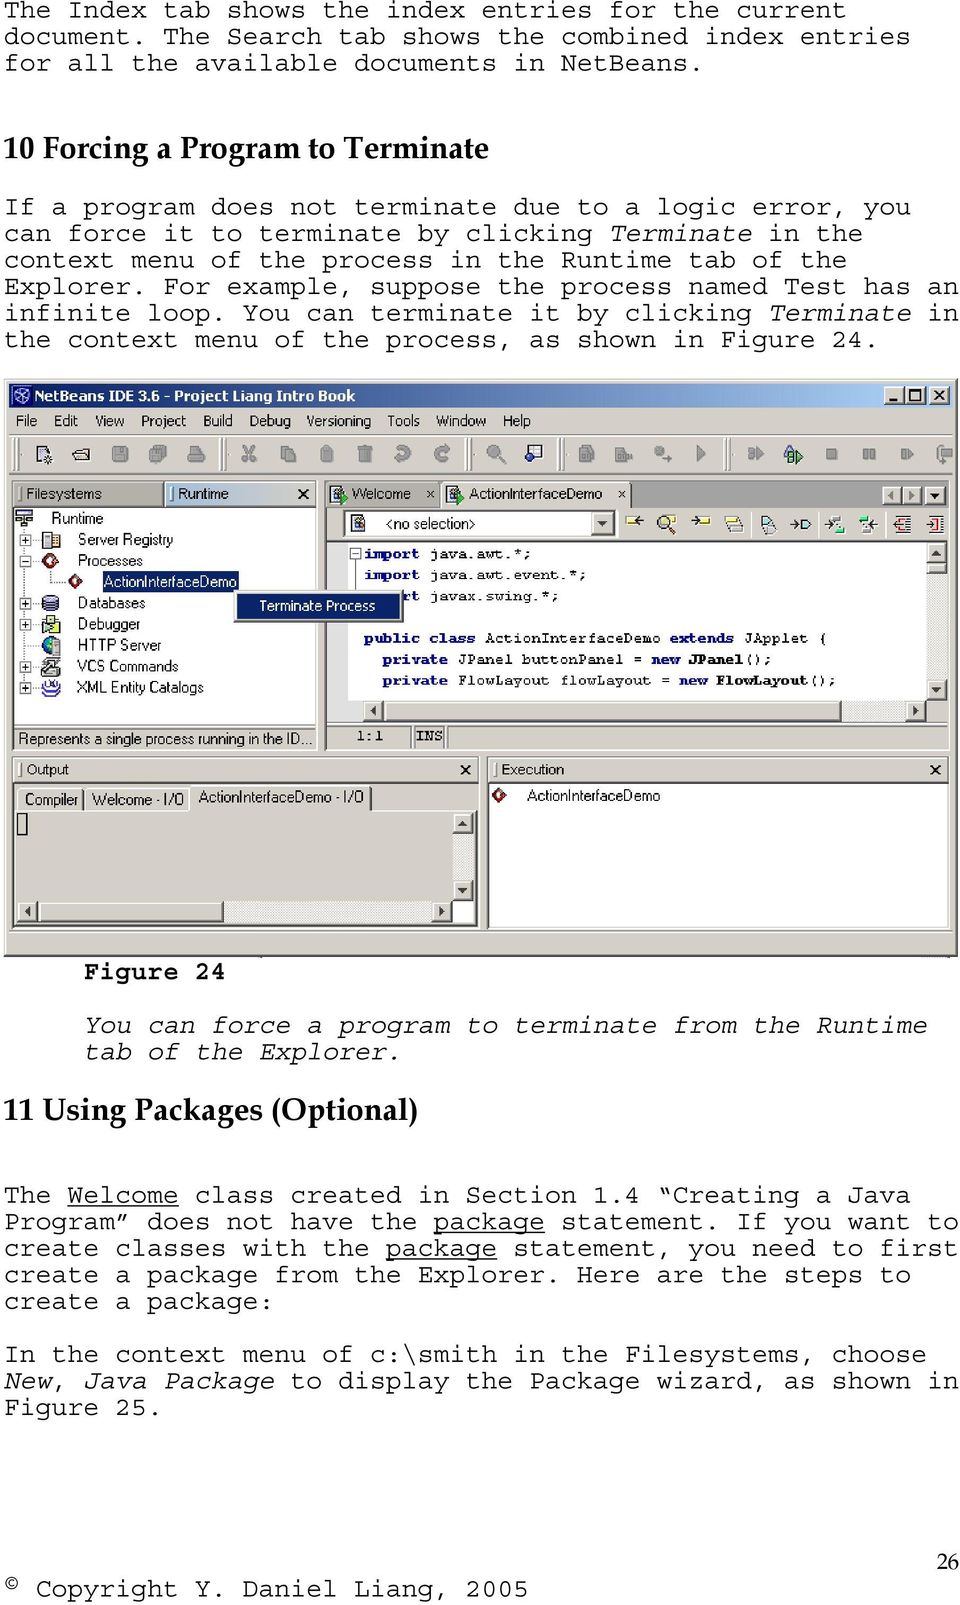 the Explorer. For example, suppose the process named Test has an infinite loop. You can terminate it by clicking Terminate in the context menu of the process, as shown in Figure 24.